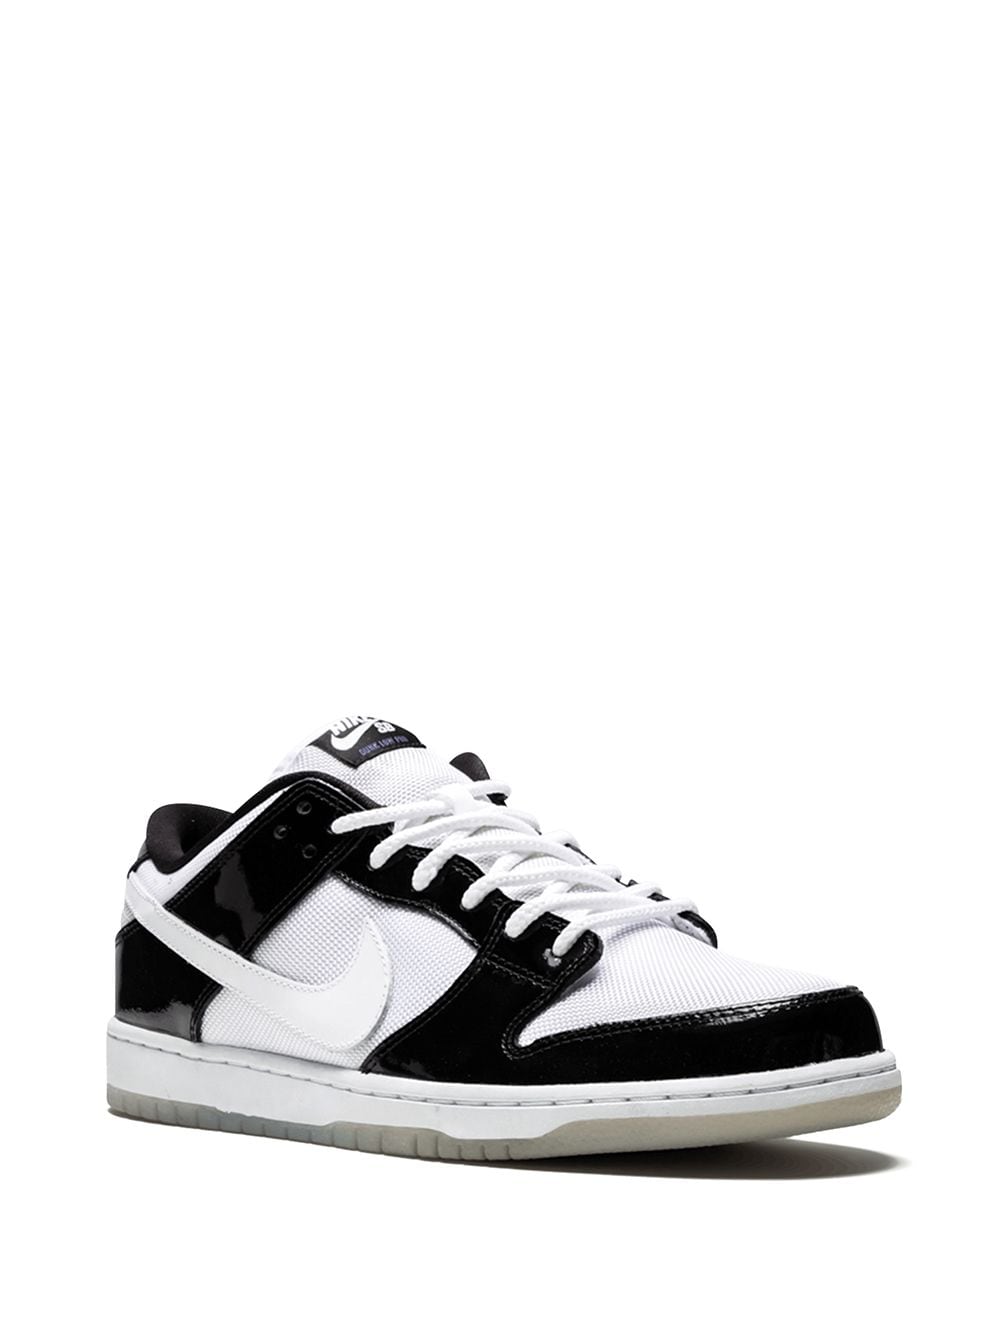 Image 2 of Nike Dunk Low Pro SB sneakers